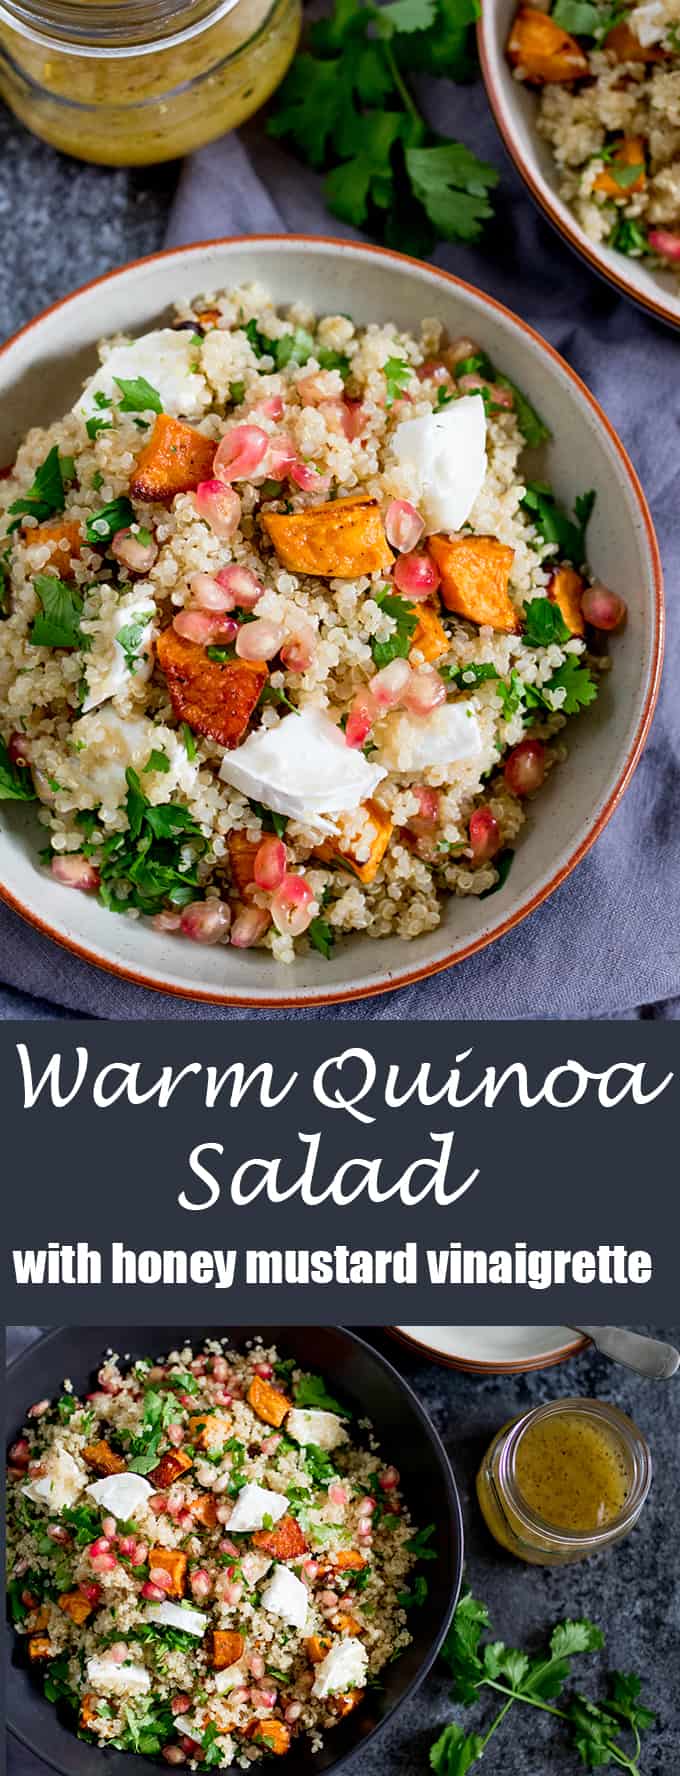 Need a comforting, warm lunch - packed full of healthy goodness too? Try this vegetarian Warm Quinoa And Goat's Cheese Salad With Honey Mustard Vinaigrette!